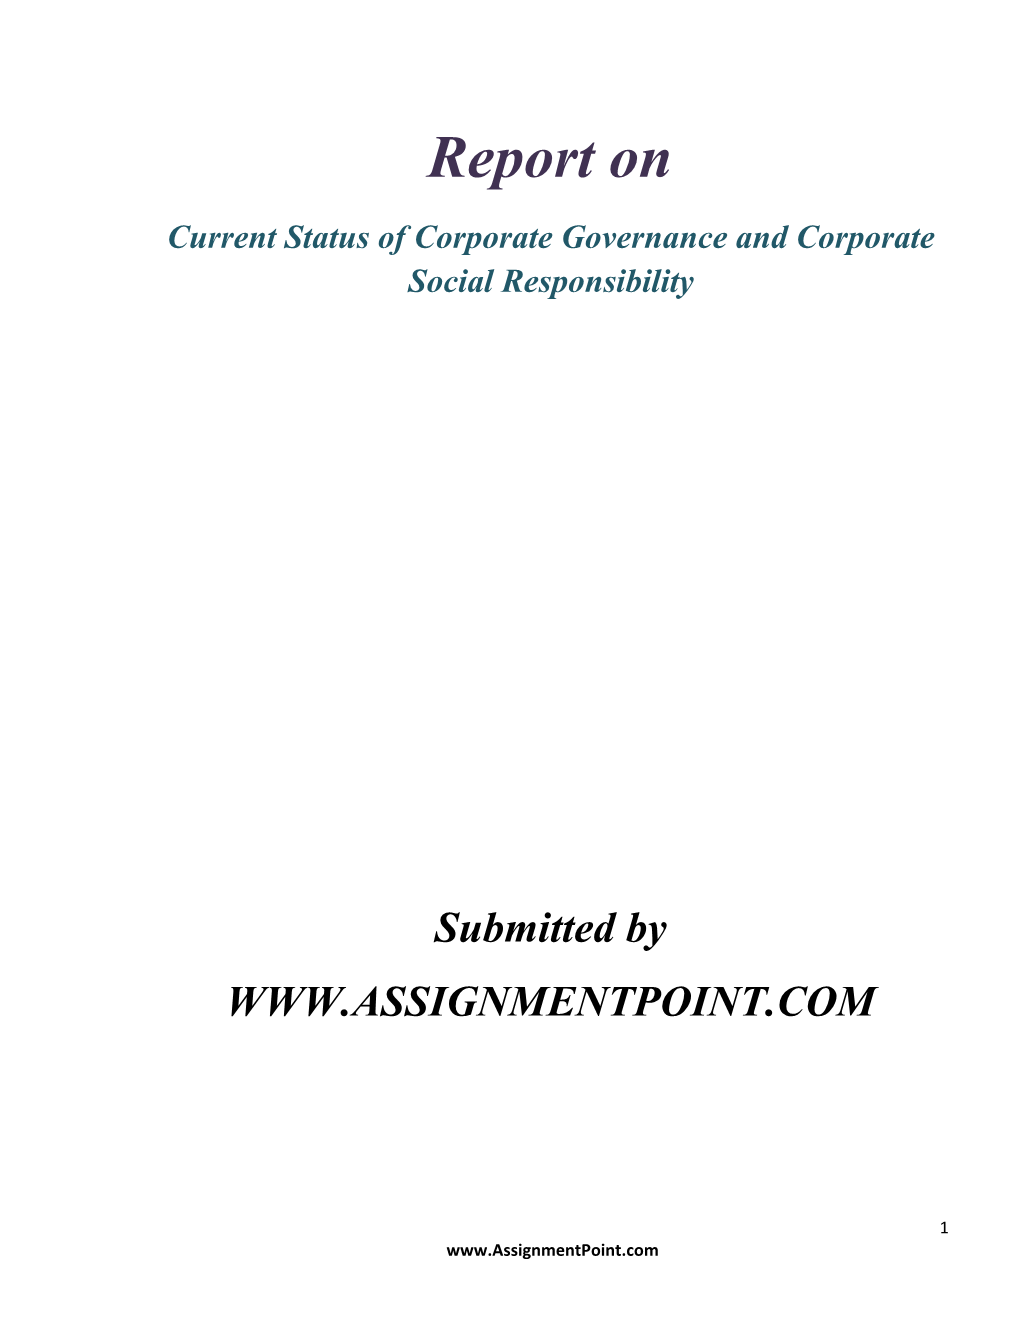 Current Status of Corporate Governance and Corporate Social Responsibility